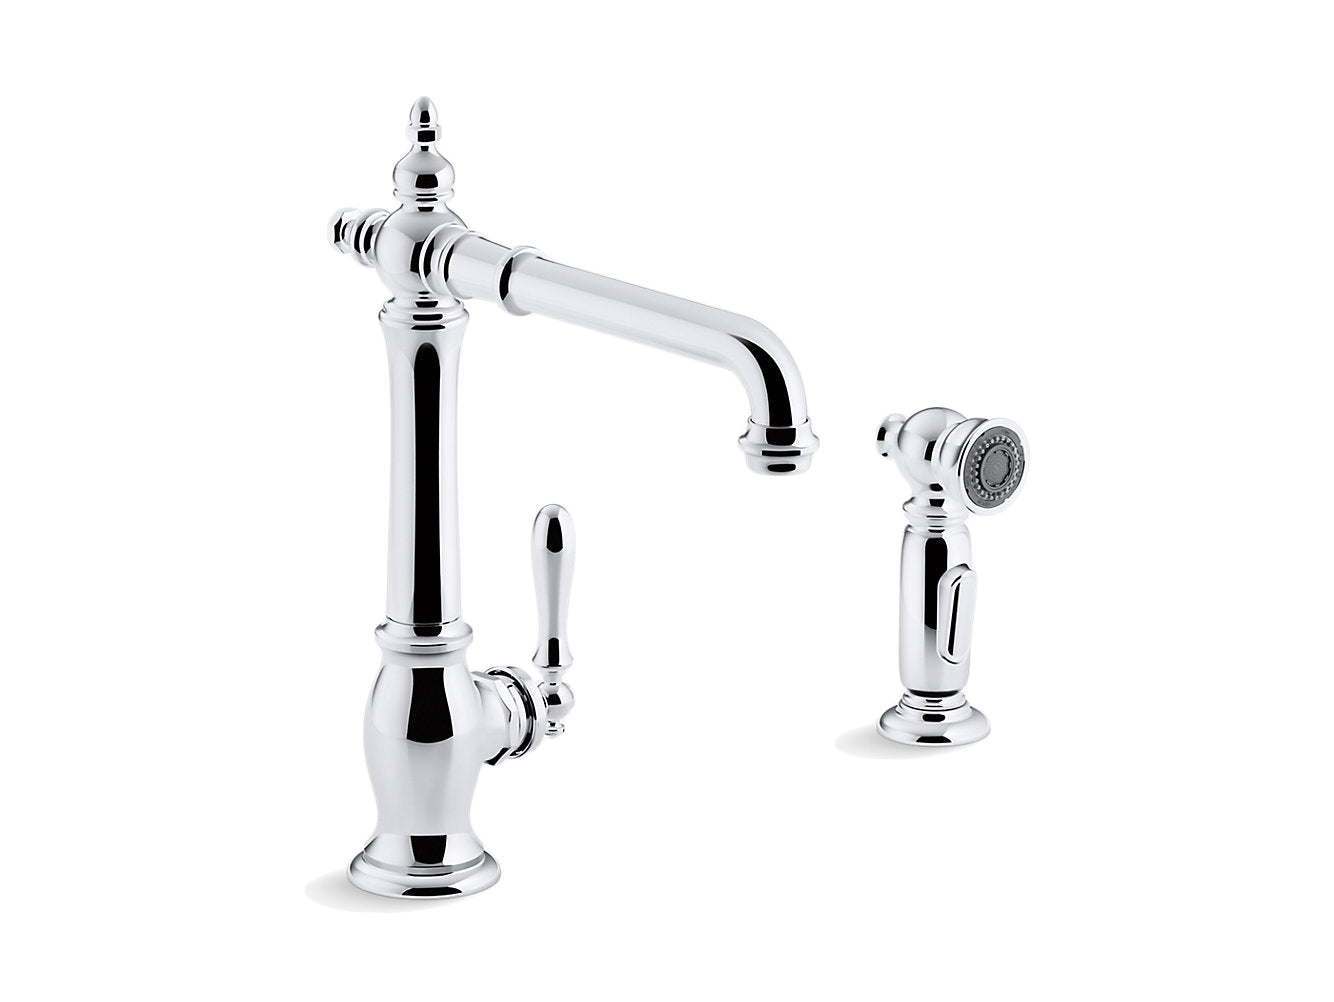 Kohler Artifacts 2 Hole Kitchen Sink Faucet With 13-1/2" Swing Spout and Matching Finish Two Function Sidespray With Sweep and Berrysoft Spray Victorian Spout Design- Chrome